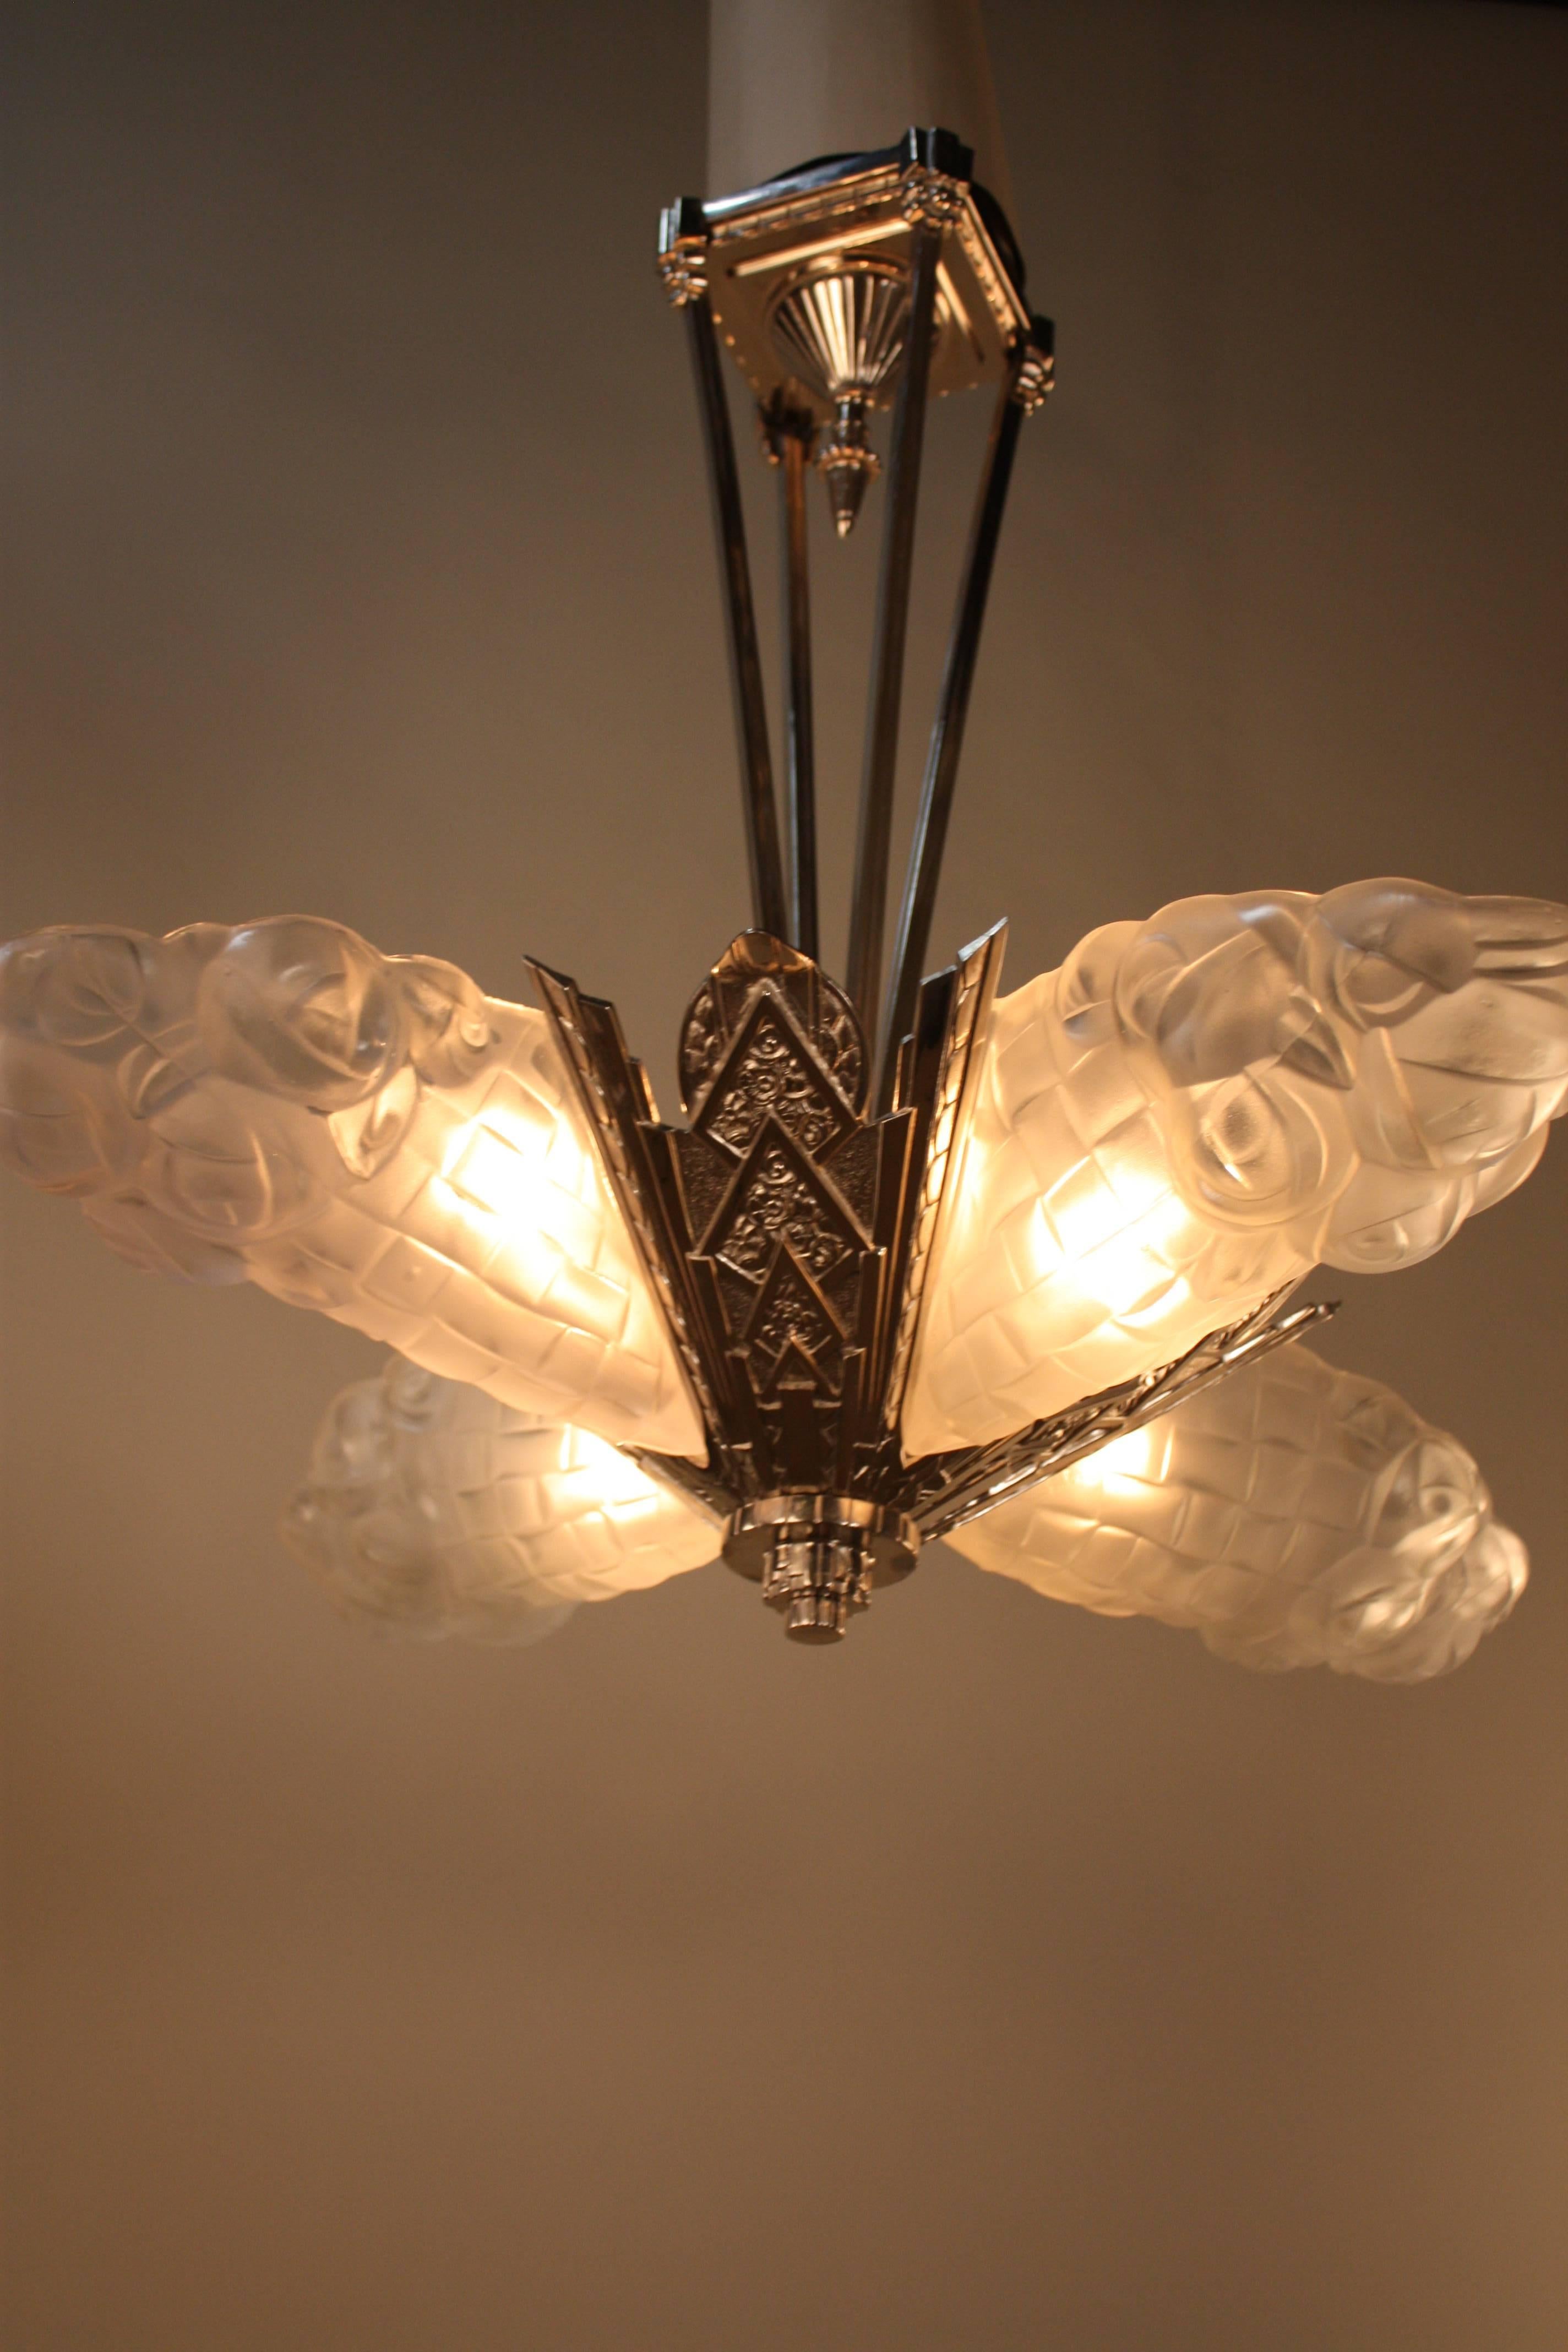 A stunning Art Deco chandelier. Crafted in France, this chandelier features four glass panels with beautiful detail work. The hardware is fantastic nickel on bronze. The chandelier measures 28